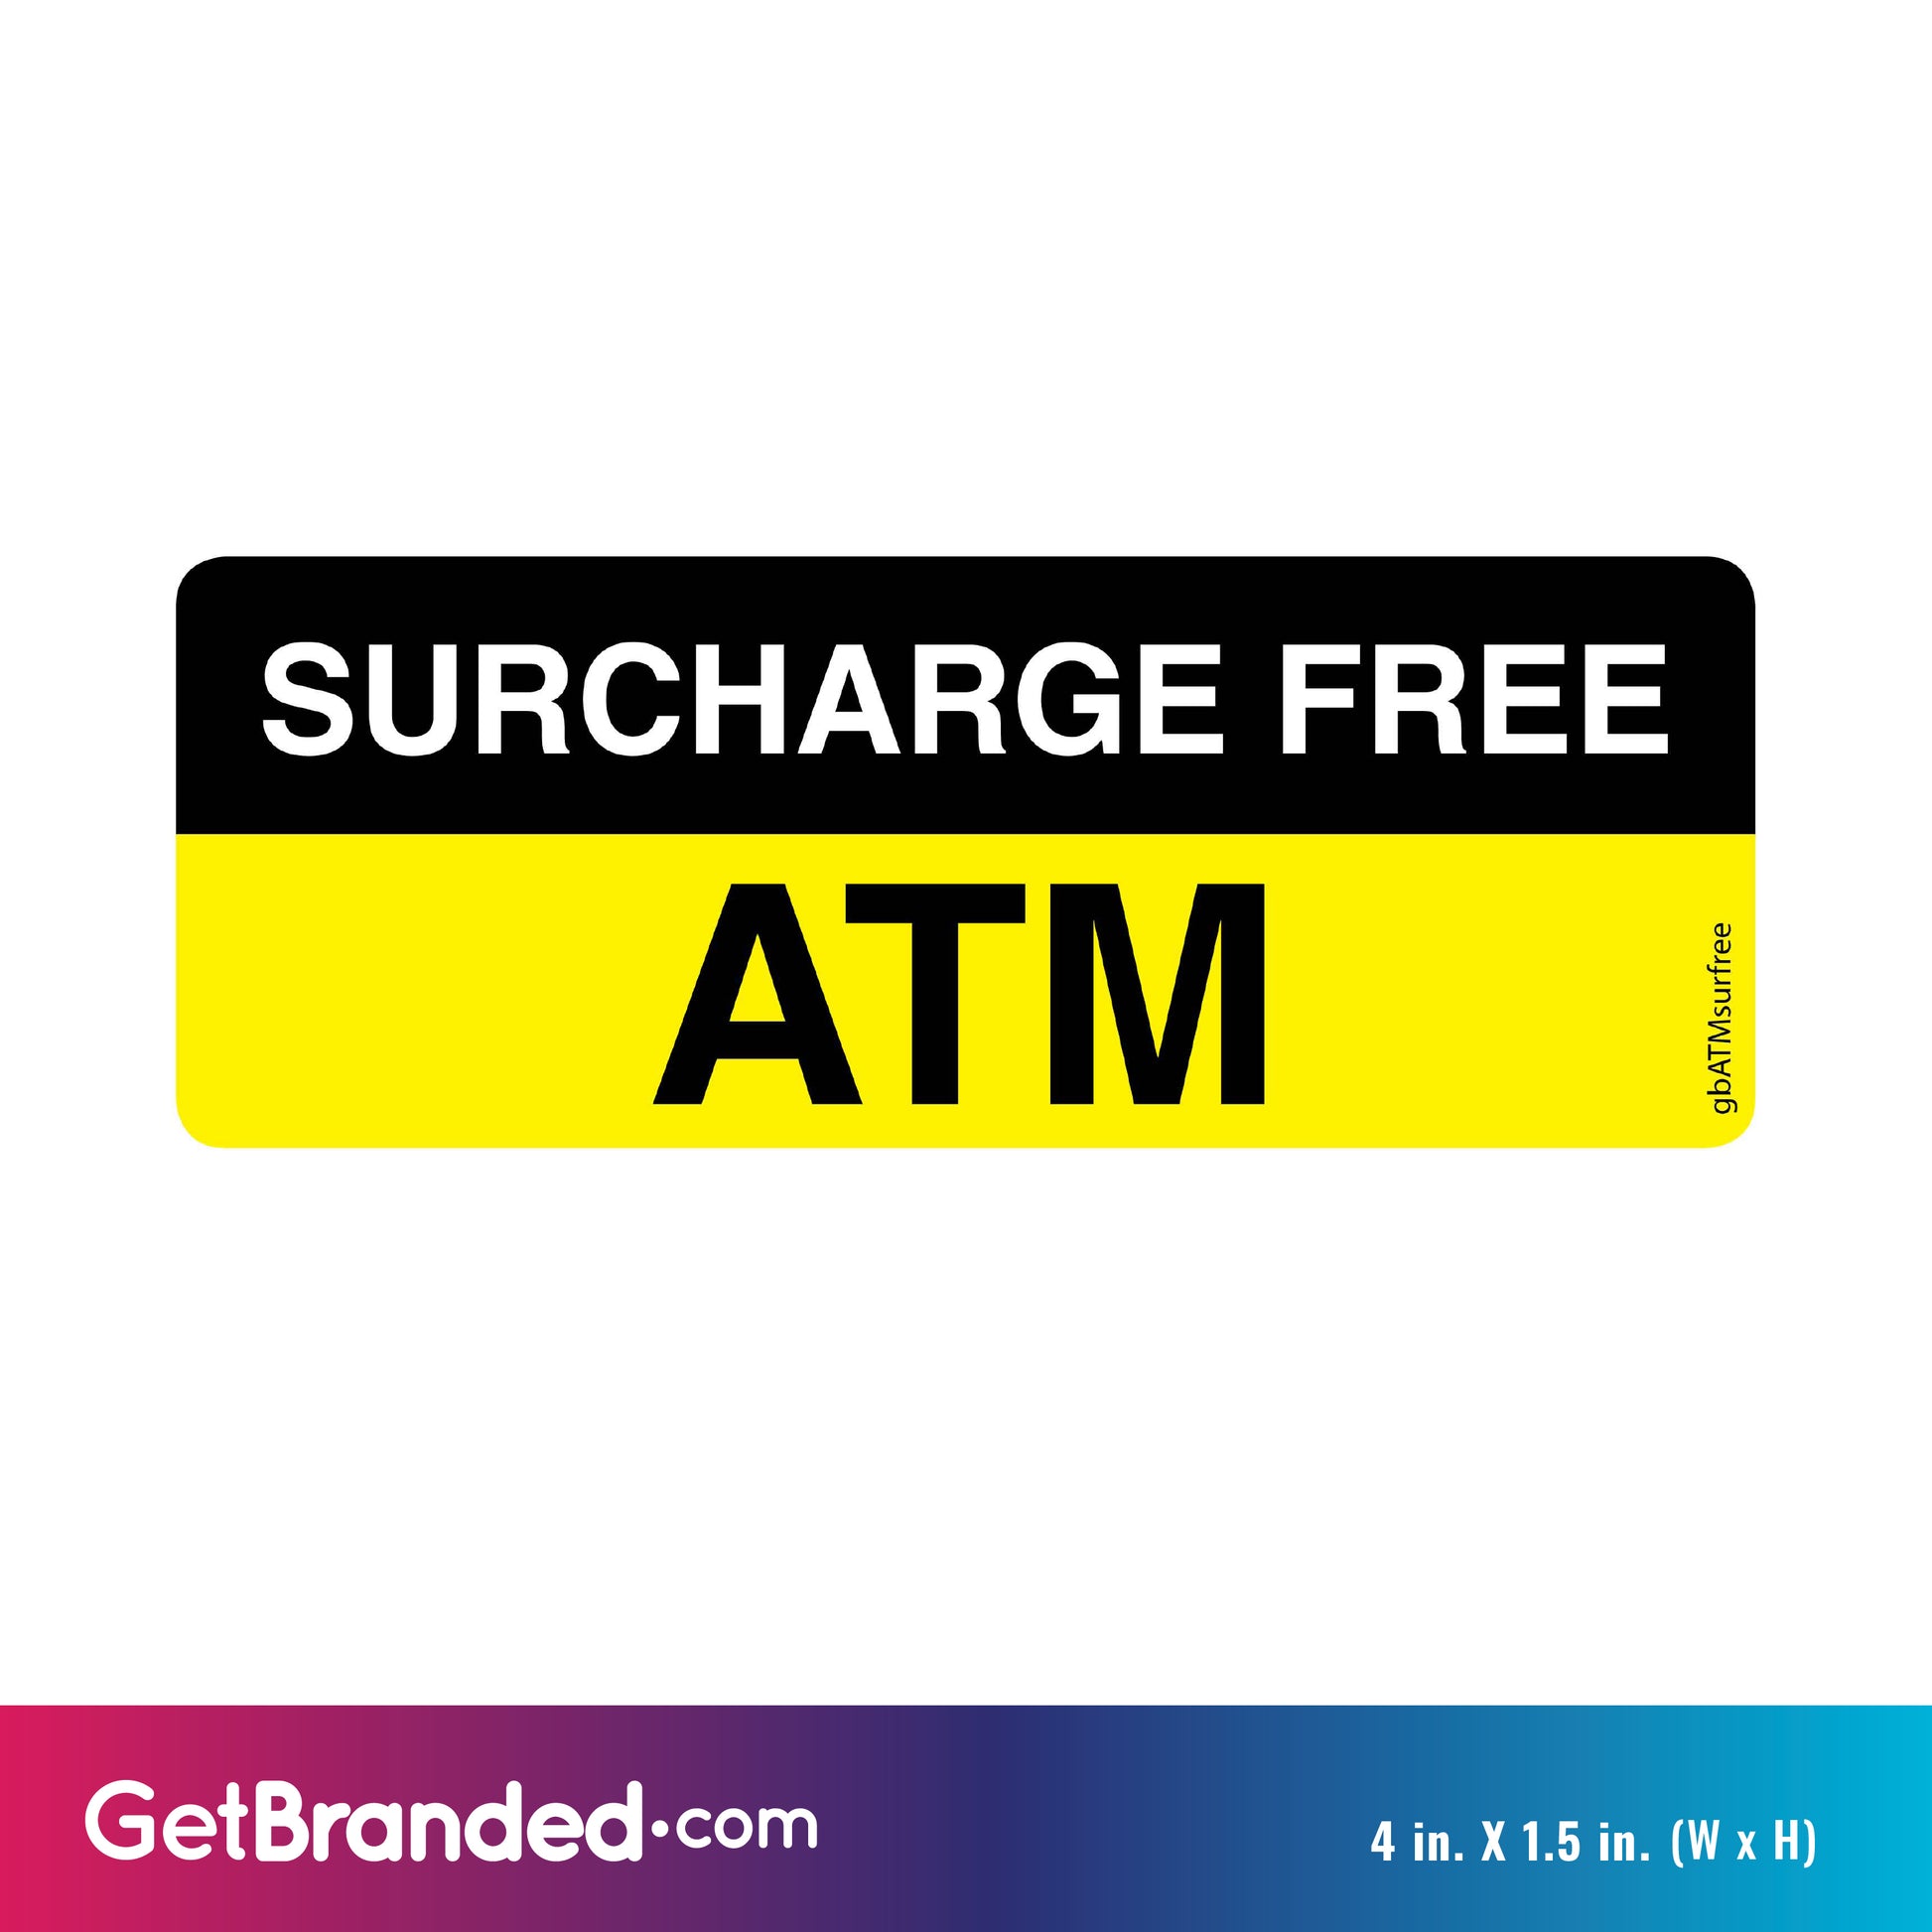 Surcharge Free ATM Decal size guide.